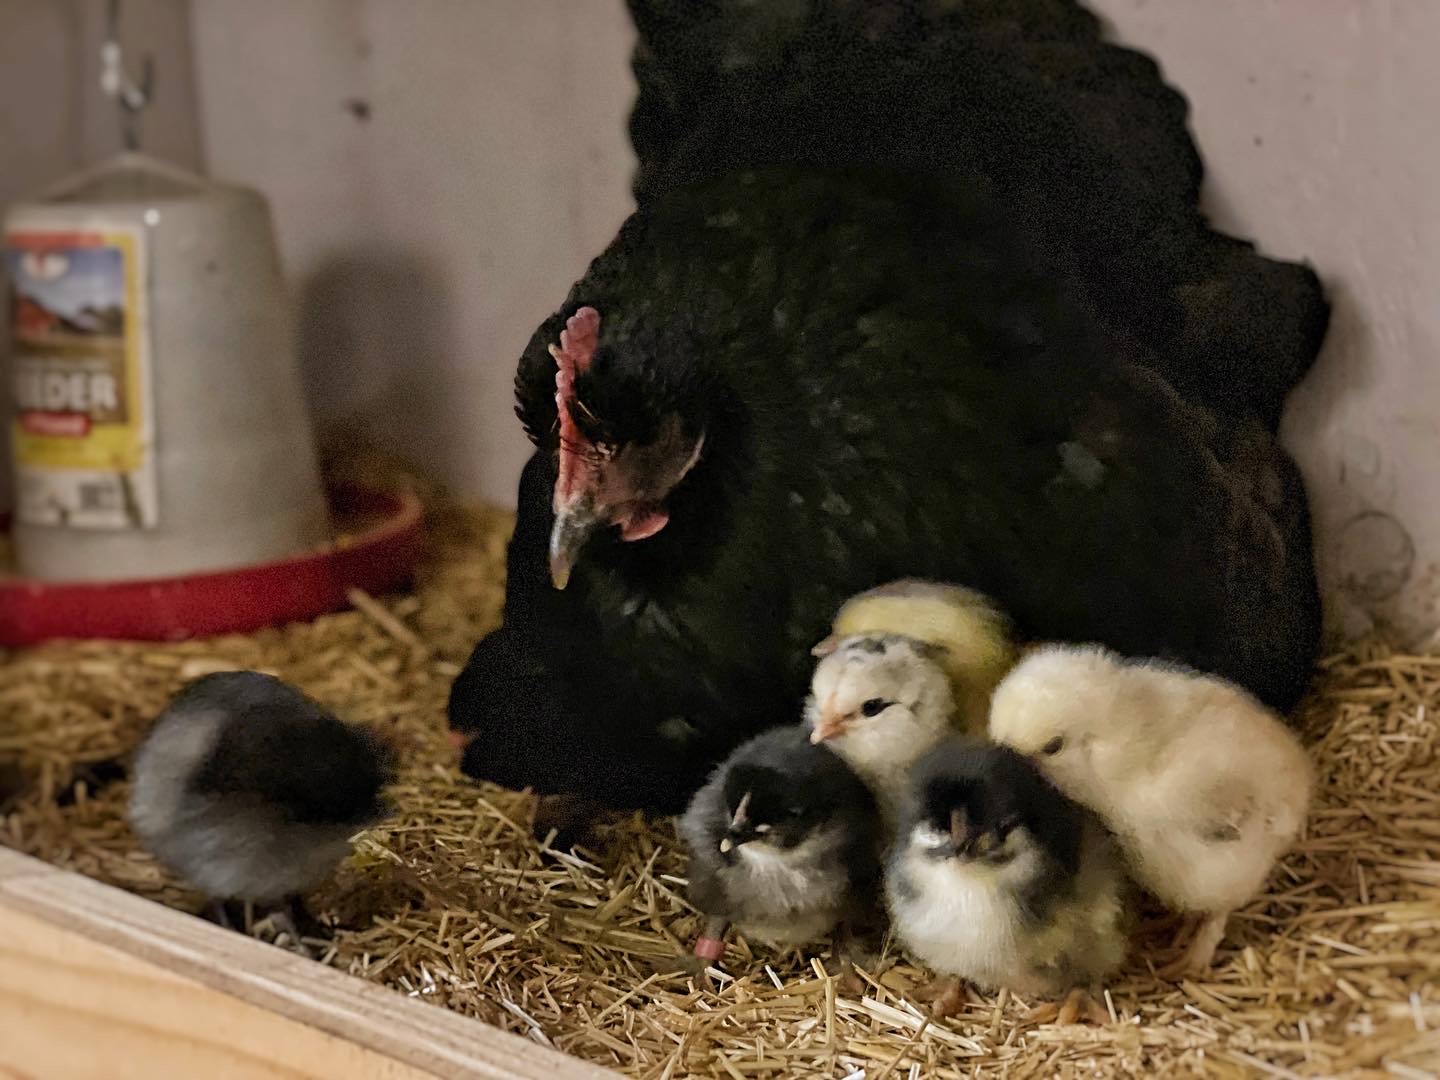 Baby chicks sitting in front of their broody mama hen inside a brooder